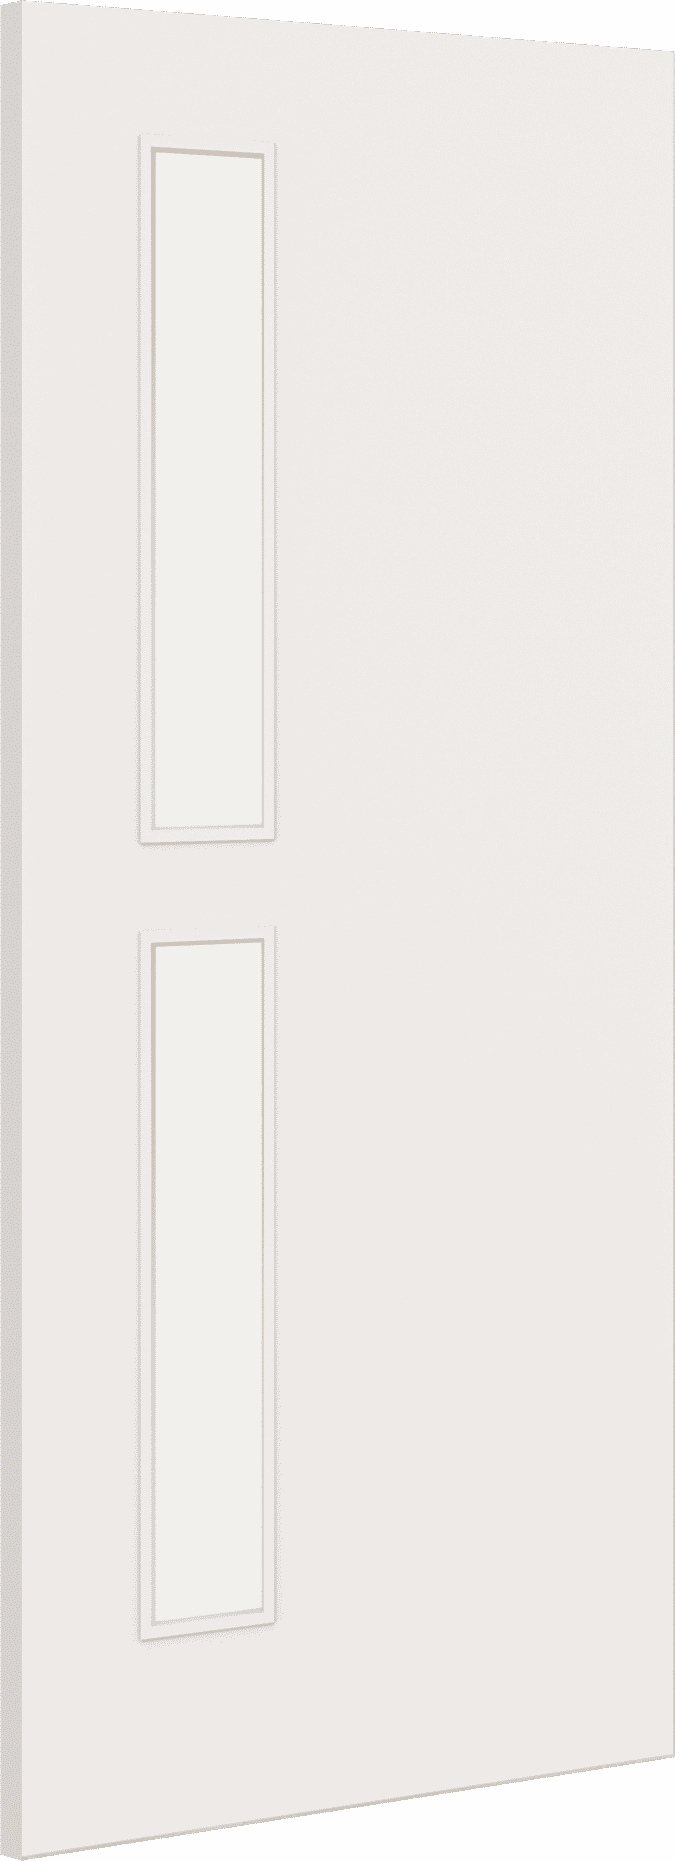 1981mm x 533mm x 44mm (21") Architectural Paint Grade White 07 Frosted Glazed Fire Door Blank